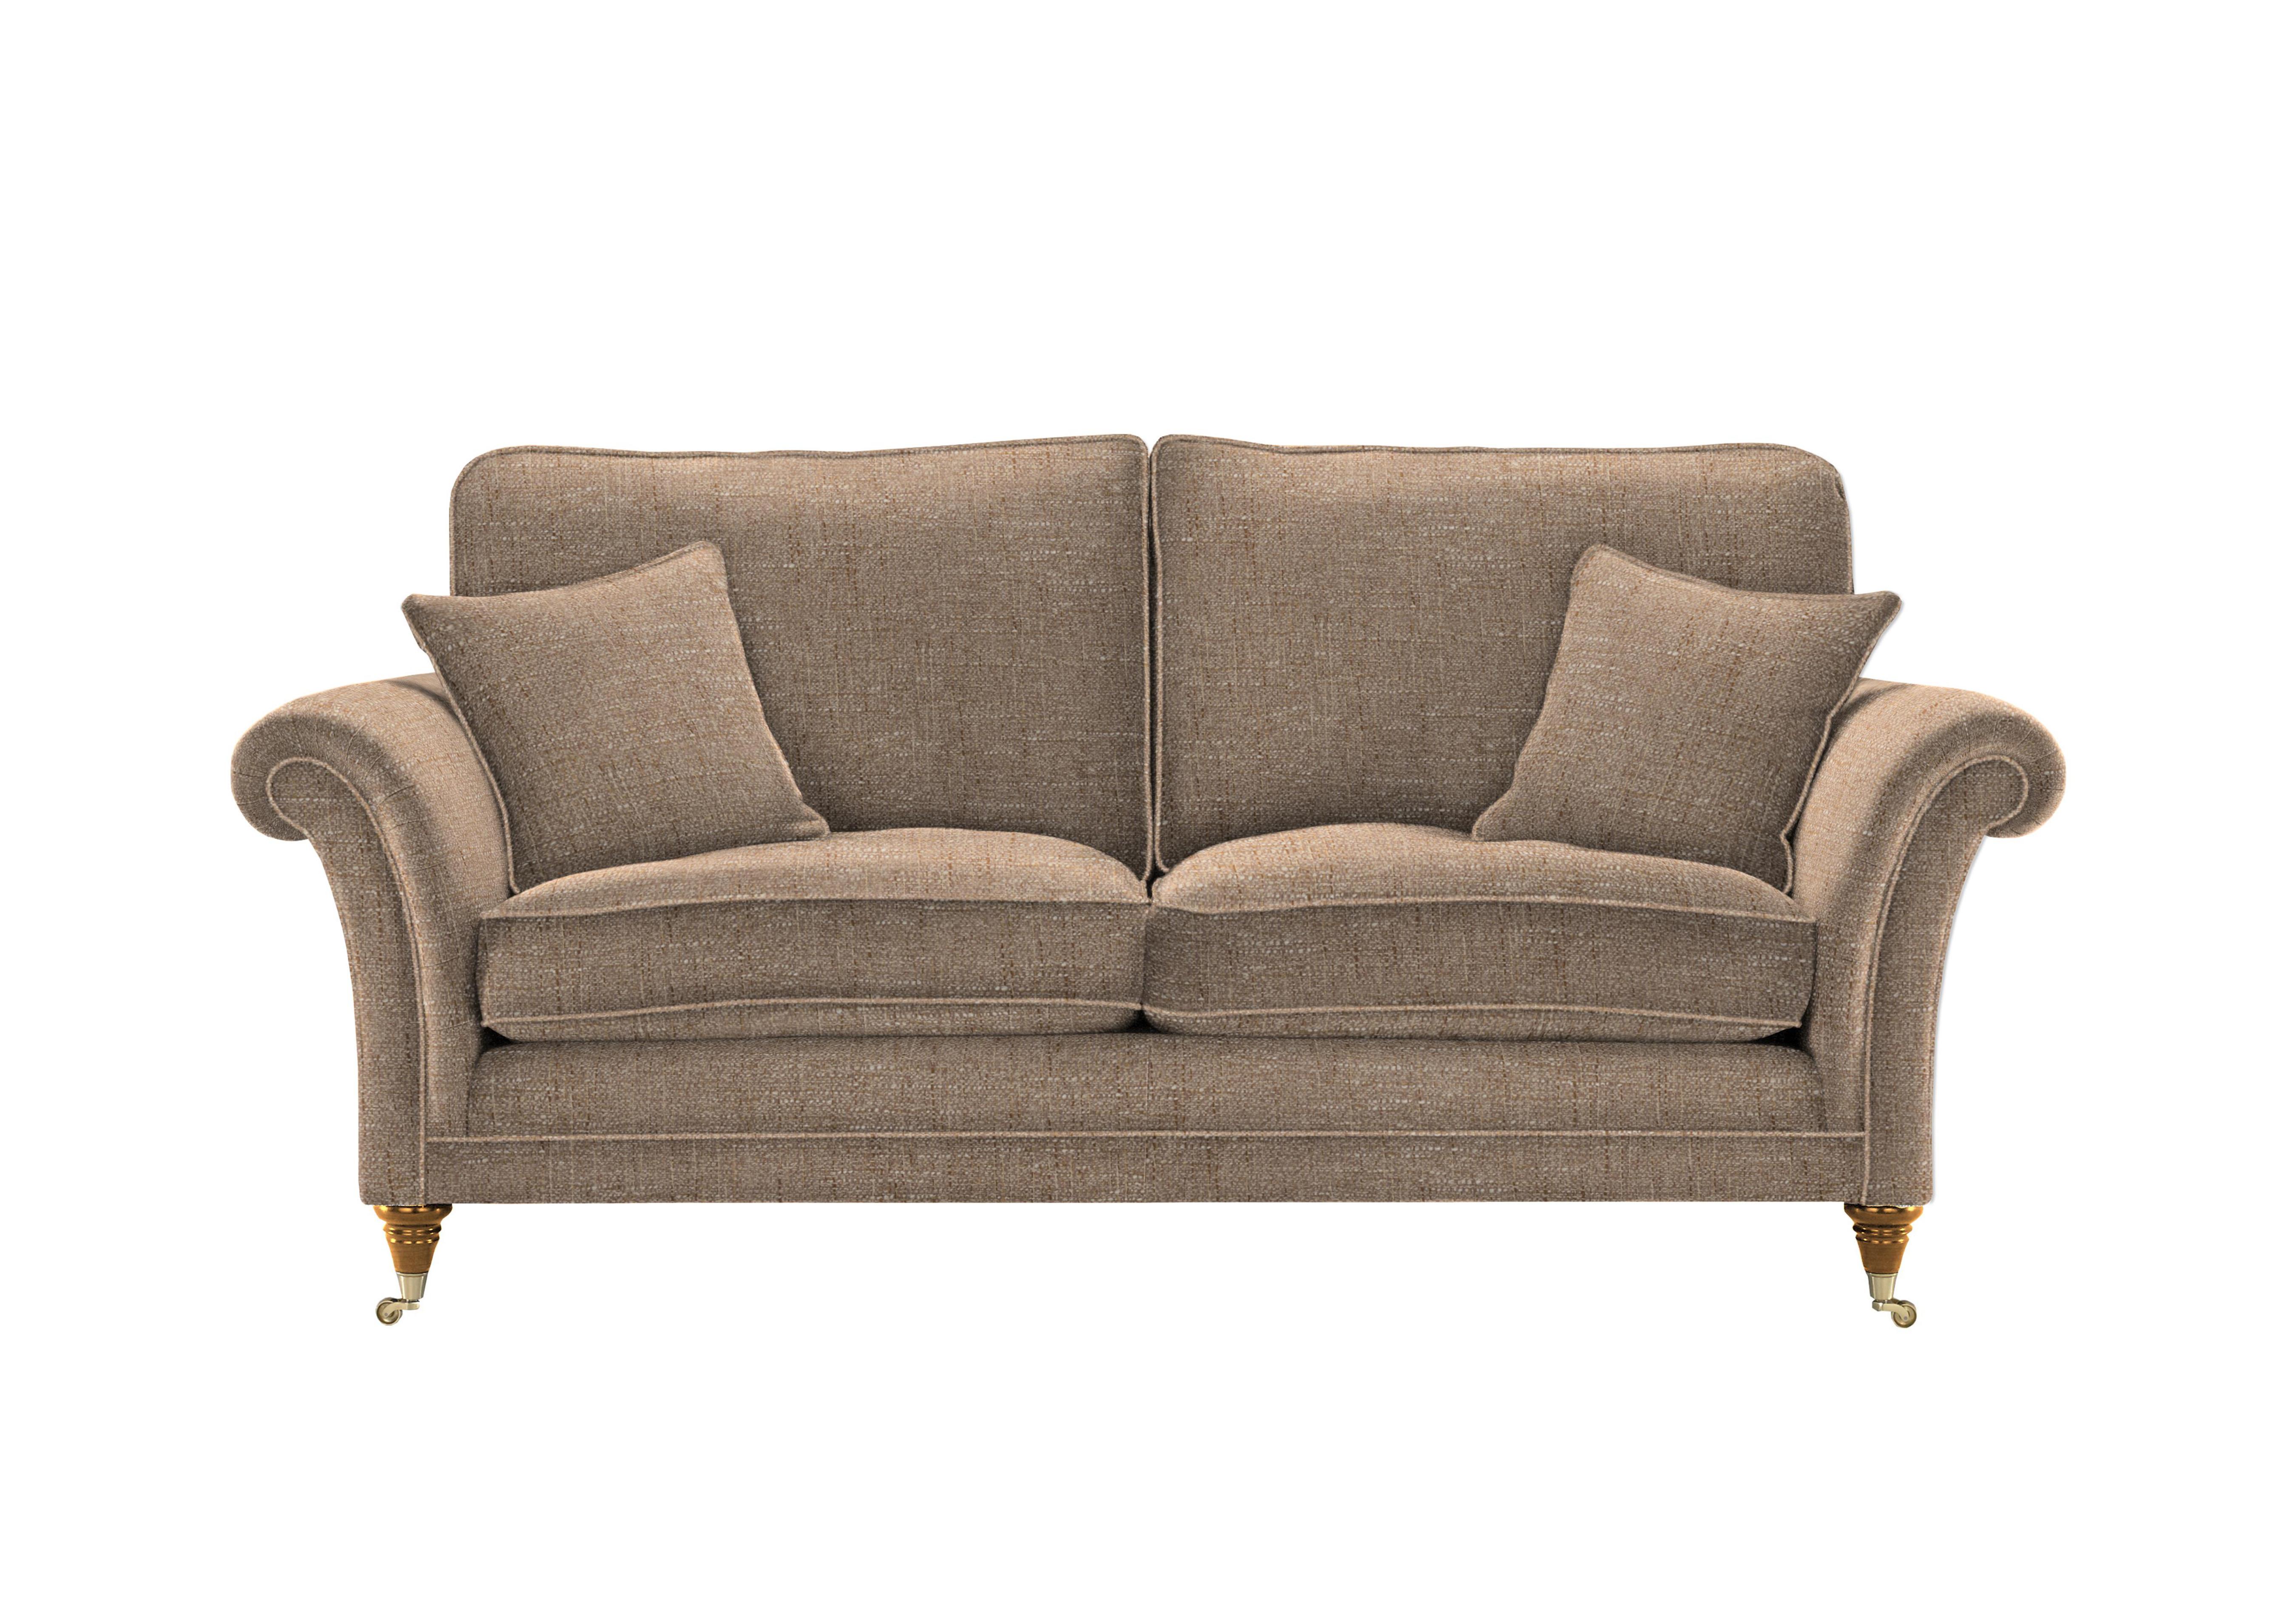 Burghley Large 2 Seater Fabric Sofa in 001408-0051 Country Oatmeal on Furniture Village